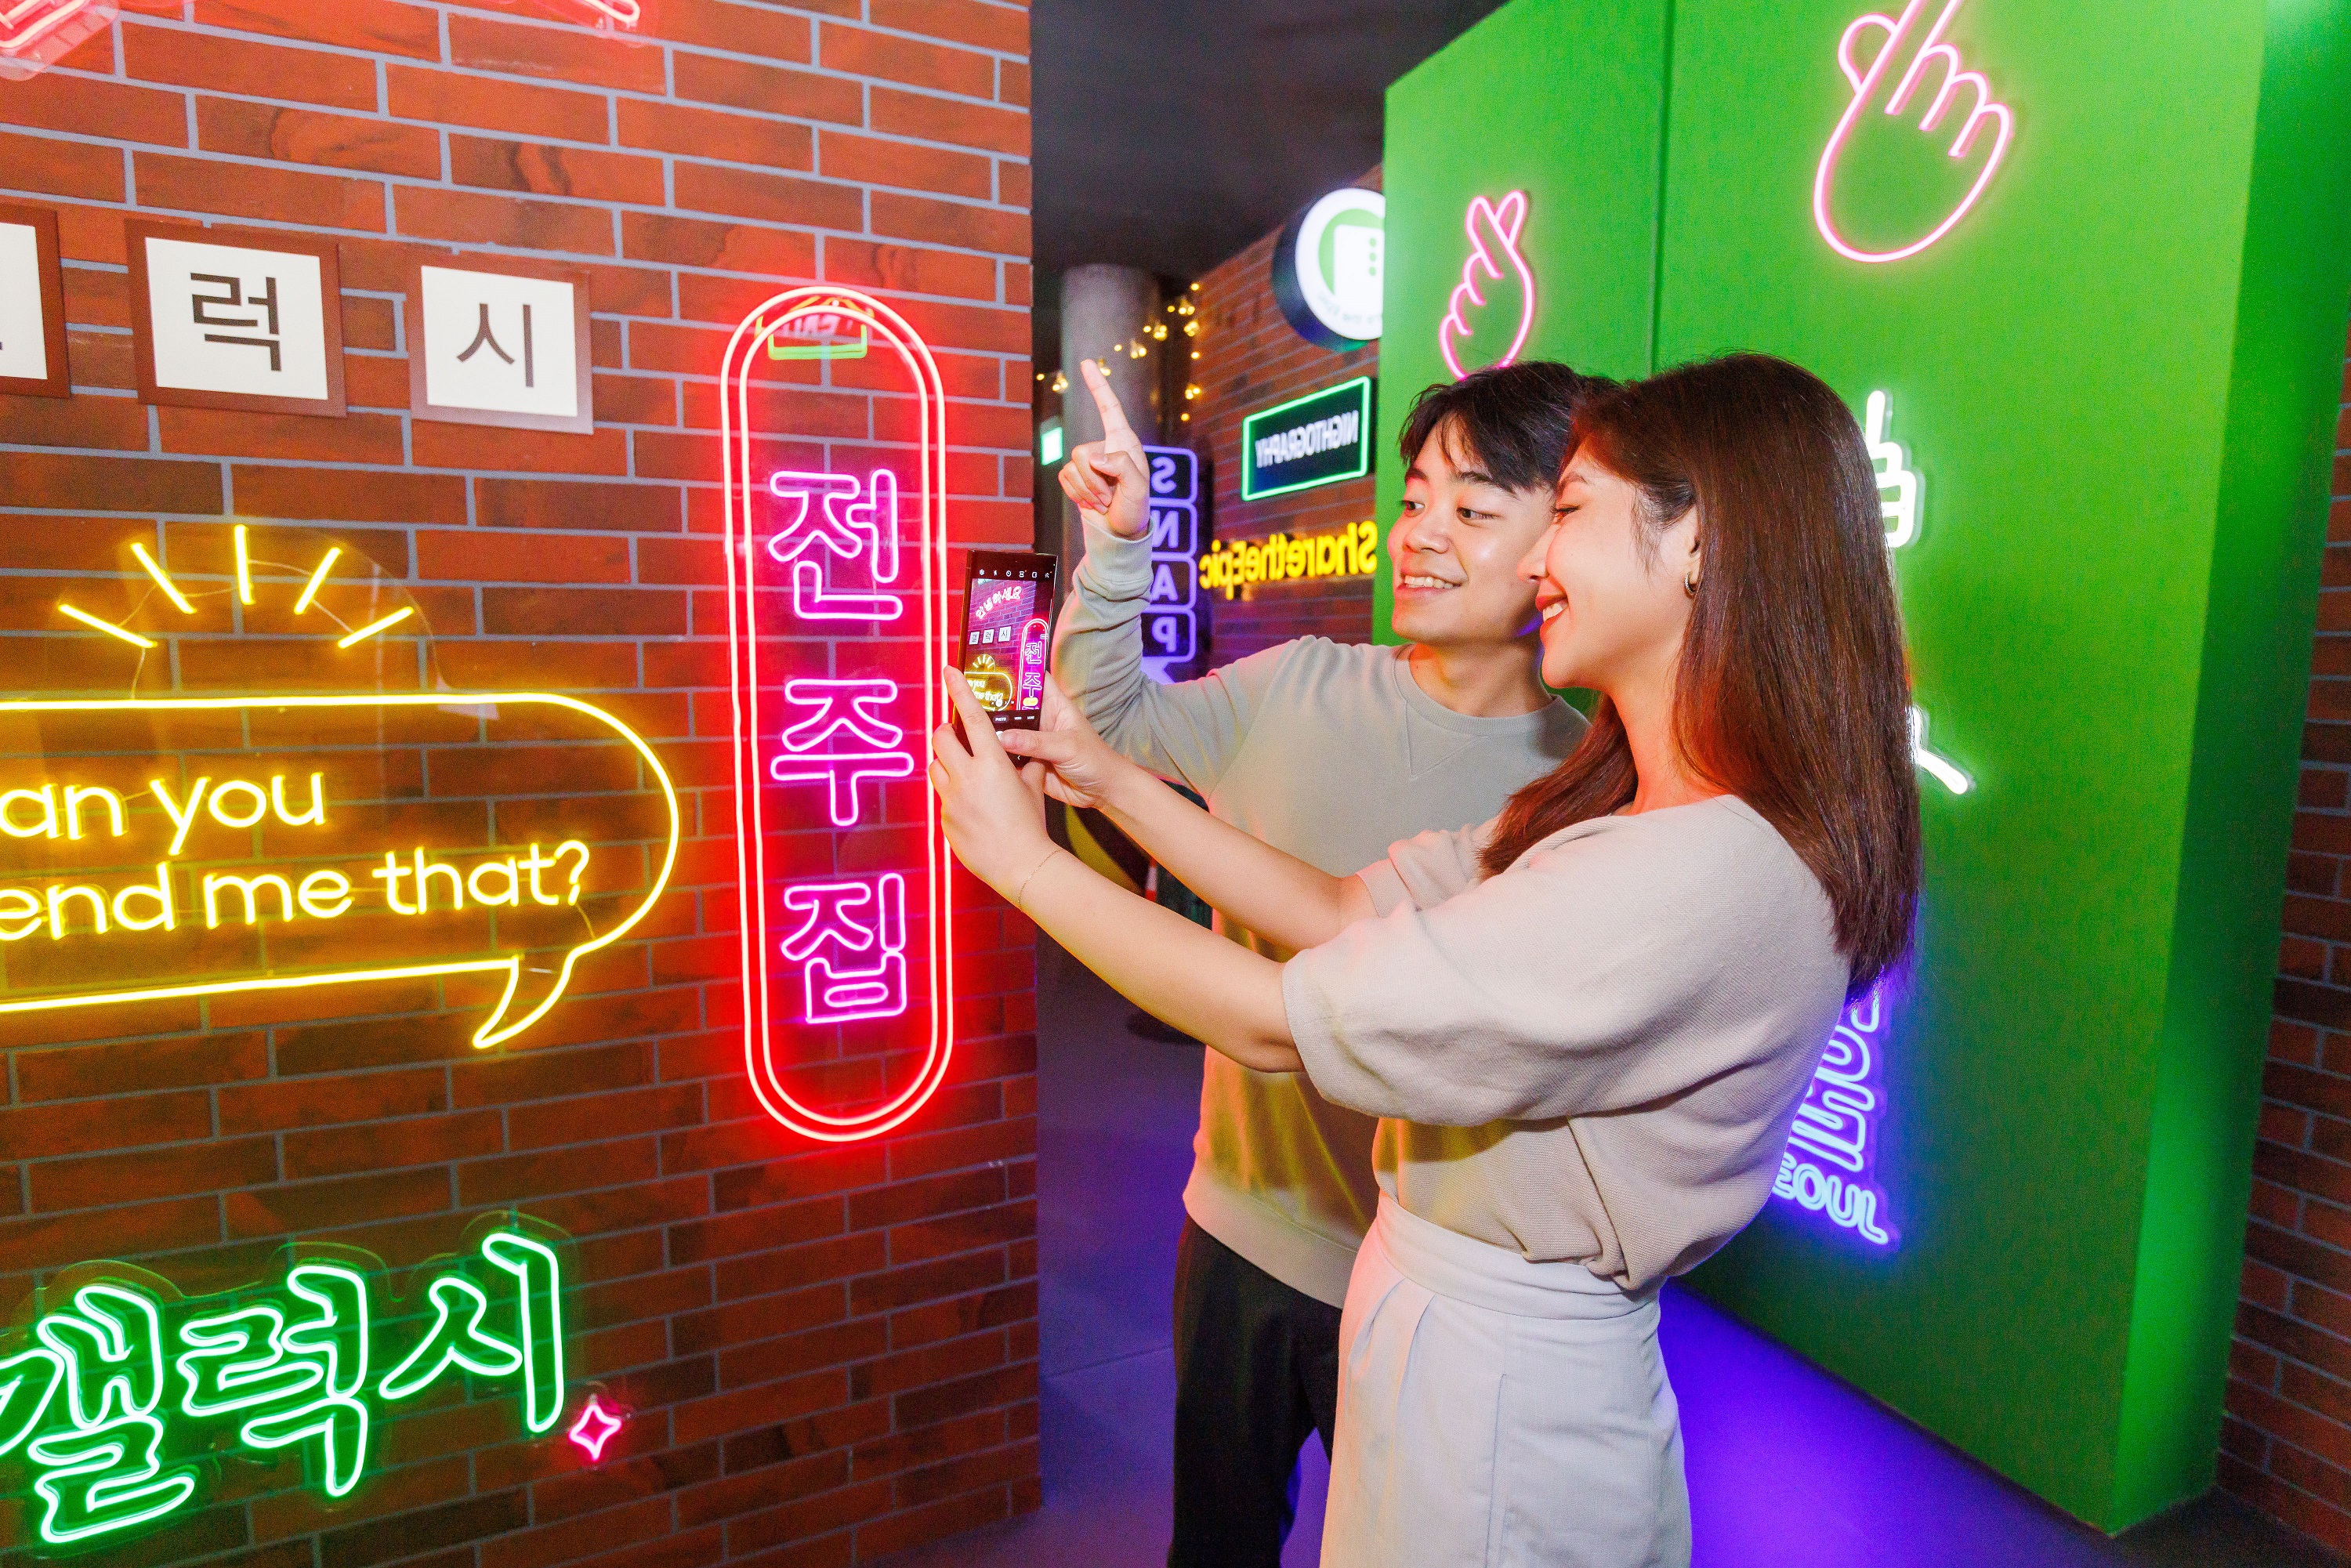 Samsung’s Galaxy Experience Space in Singapore Offers Innovative Experiences with the Galaxy S23 Series